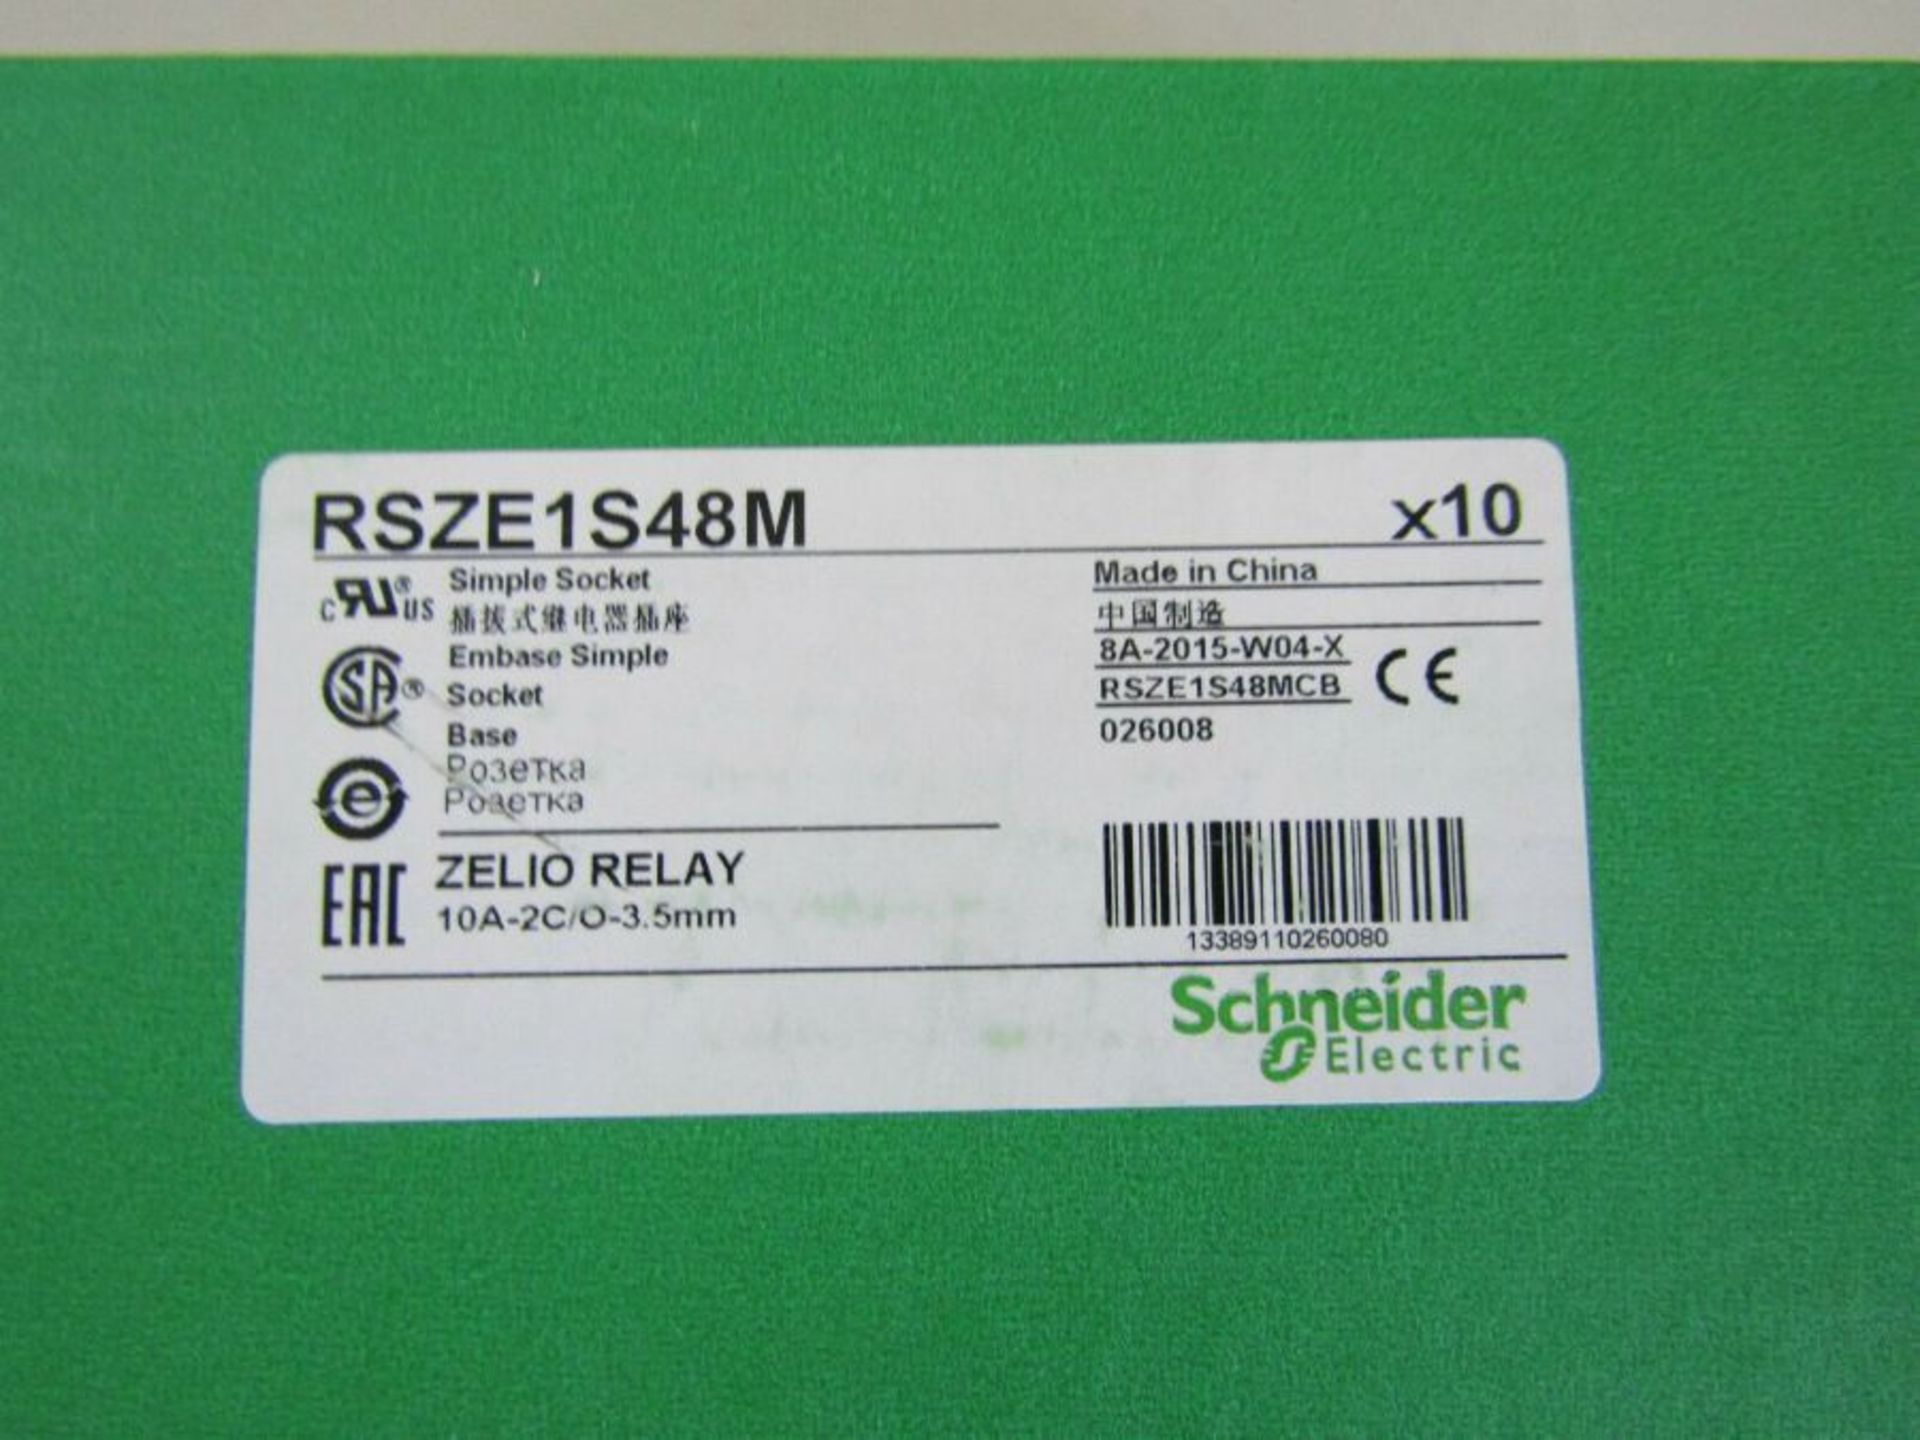 200 x SCHNEIDER RSZE1S48M Relay Socket for RSB Series - S2 - 8497667 - Image 4 of 4